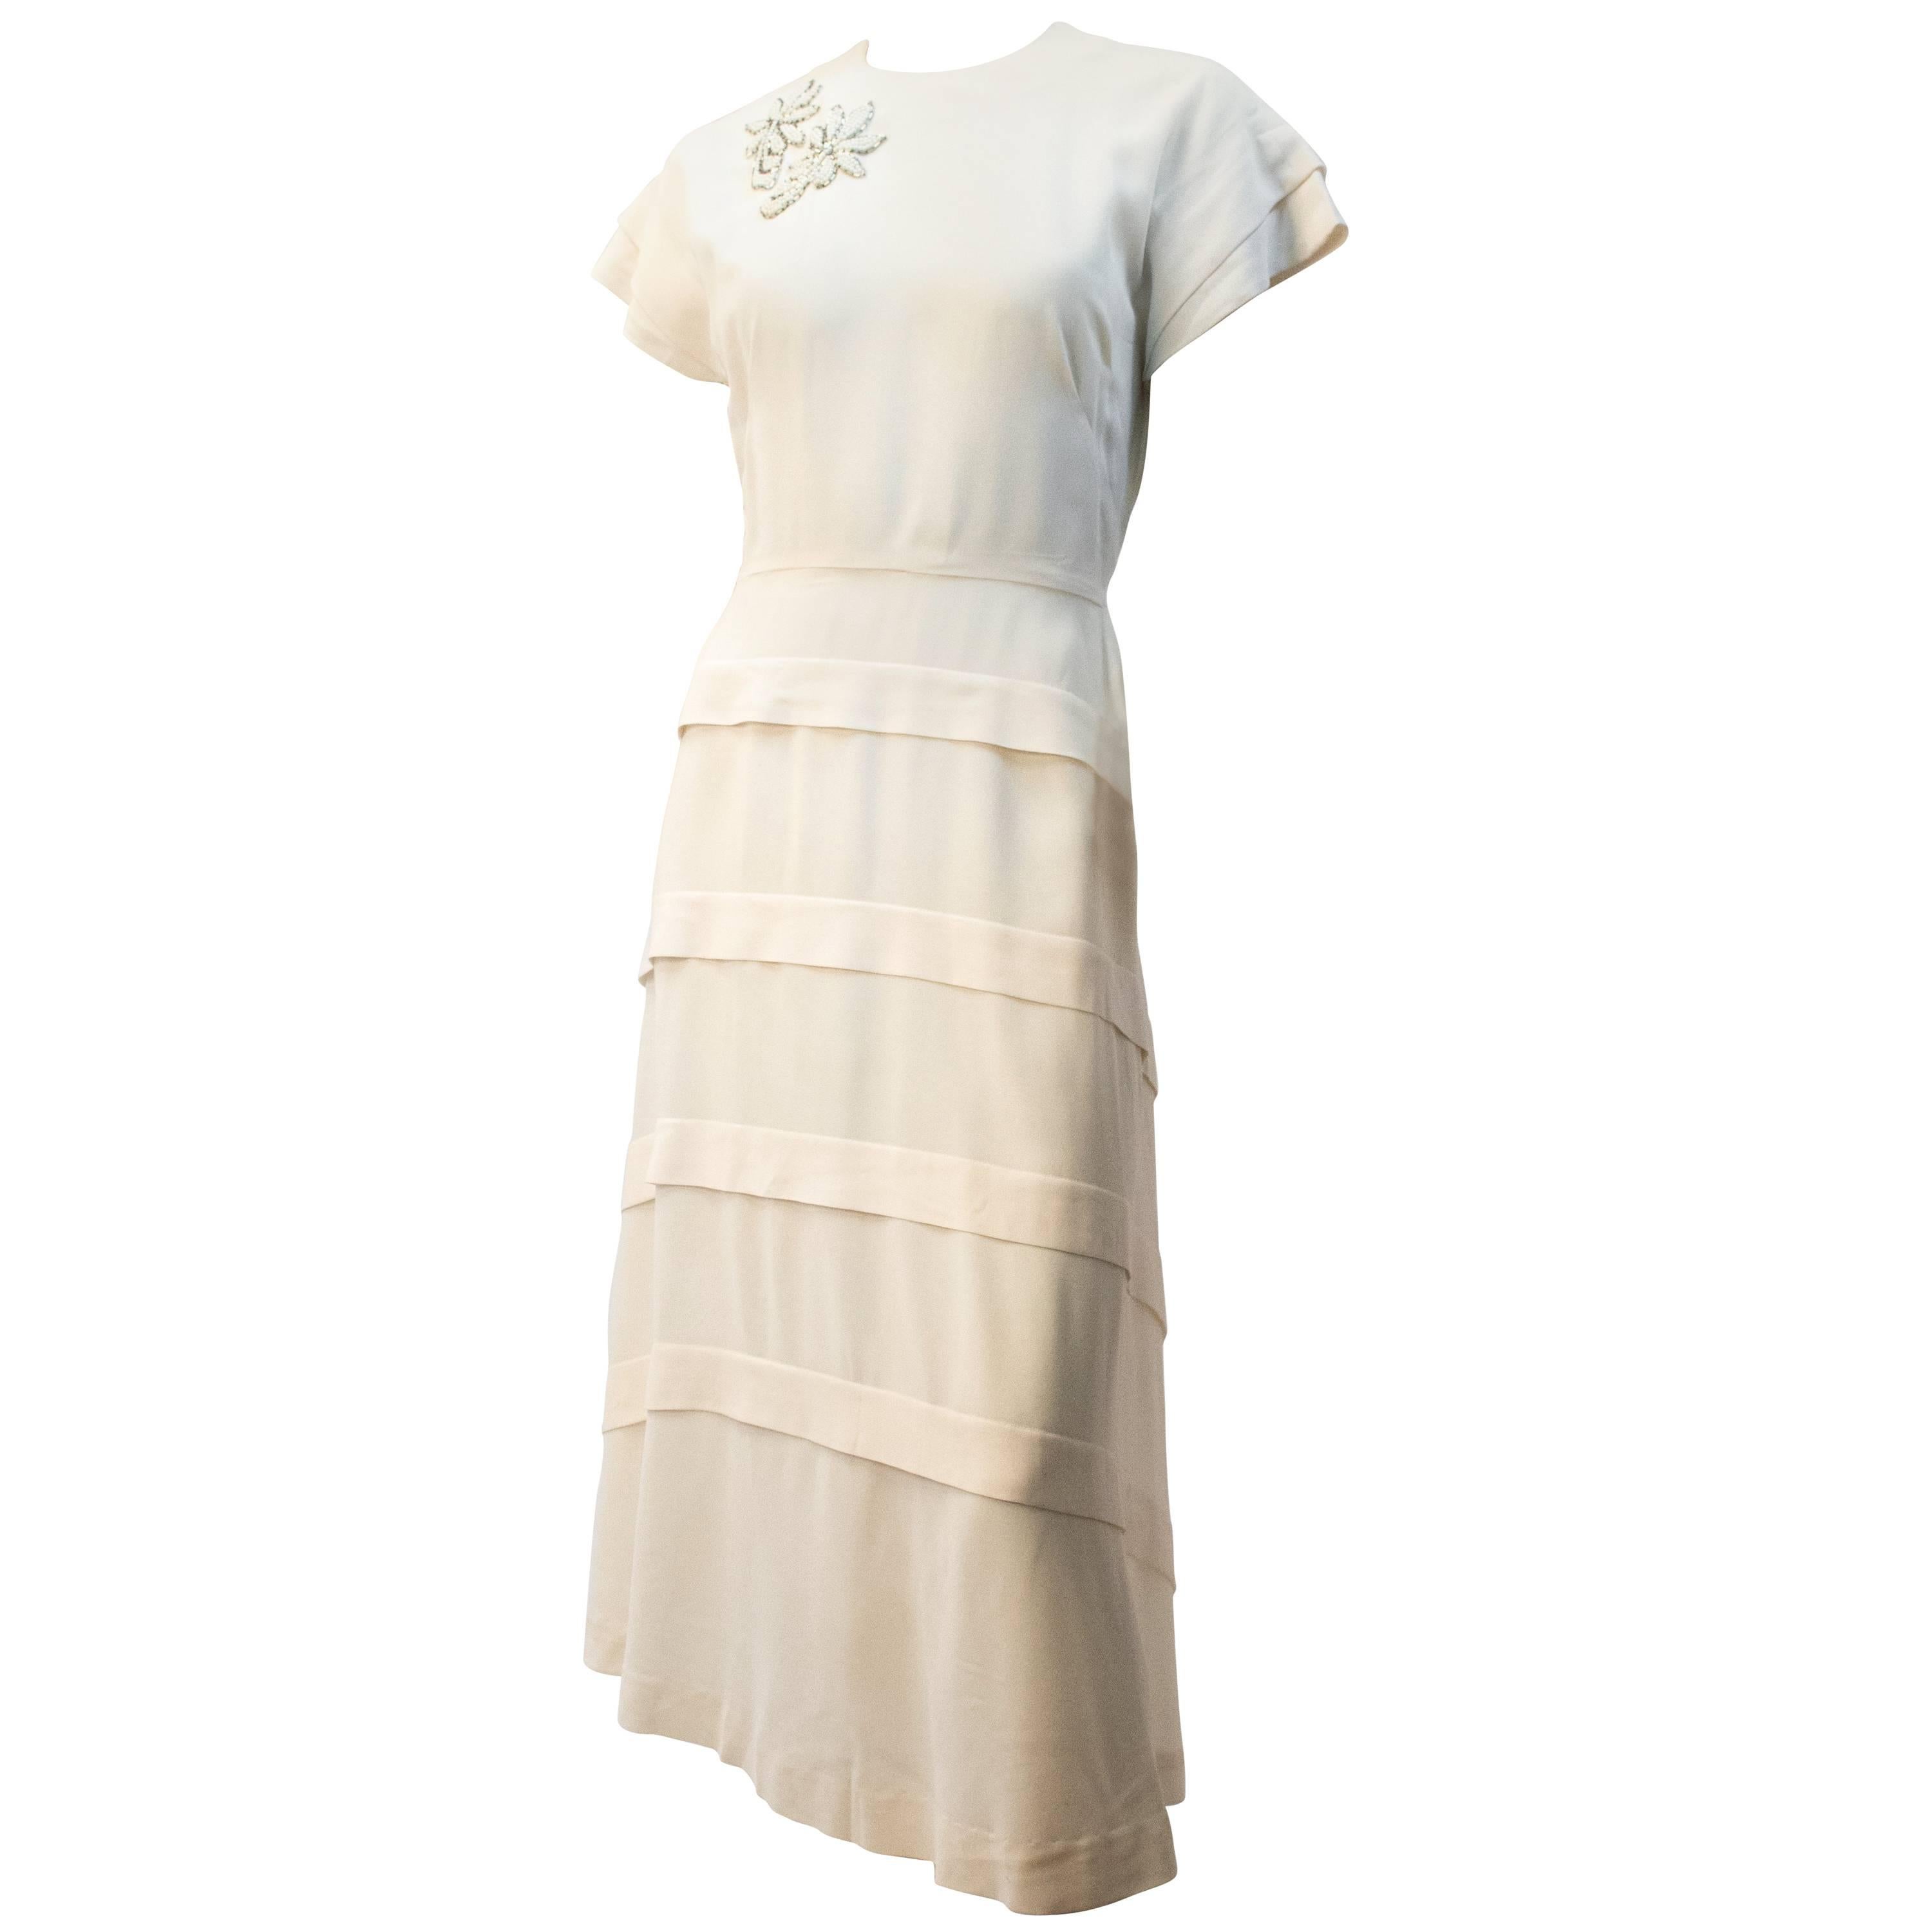 40s White Dress with Hand Beaded Appliqué